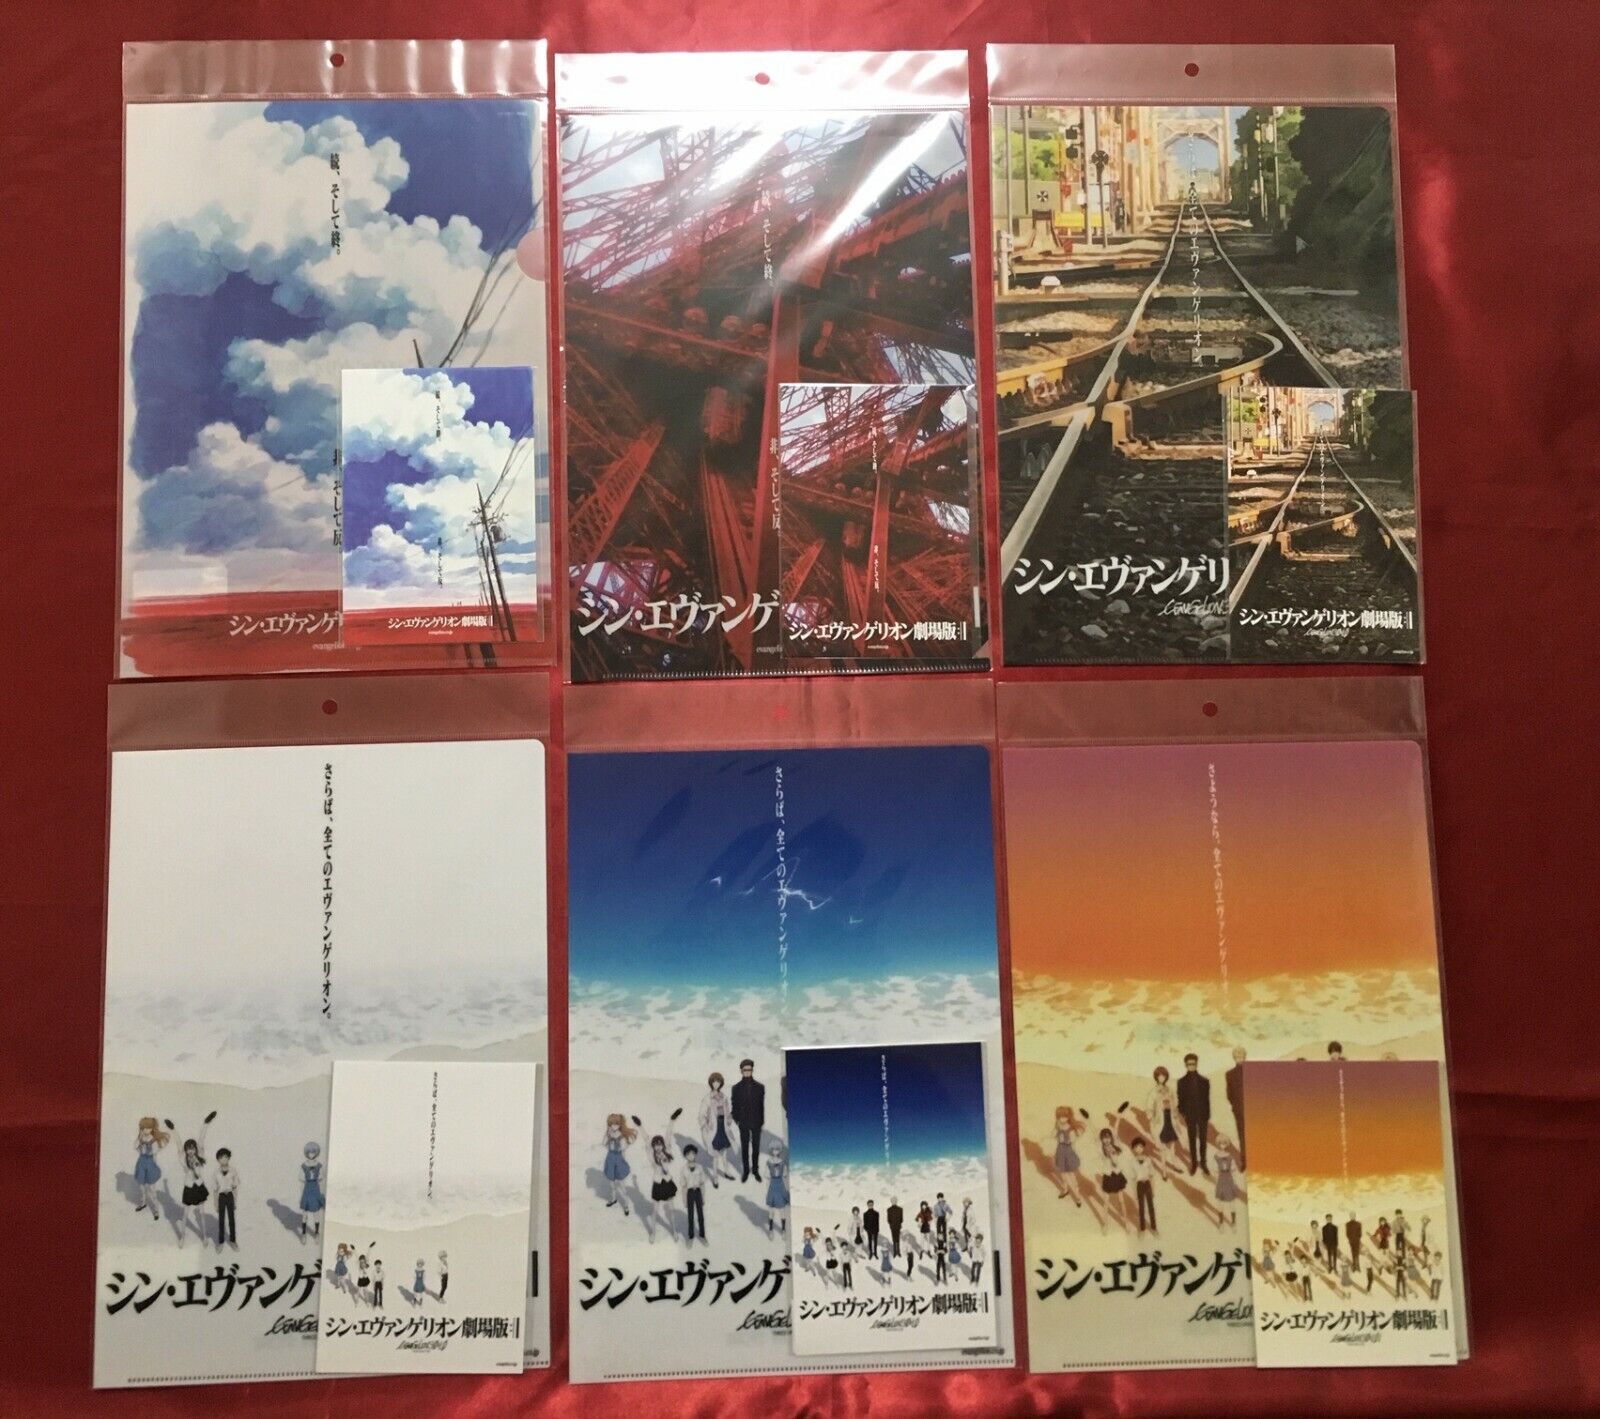 Shin Evangelion 3.0+1.0; 6 different Clear File & Postcard Posters New/Sealed 